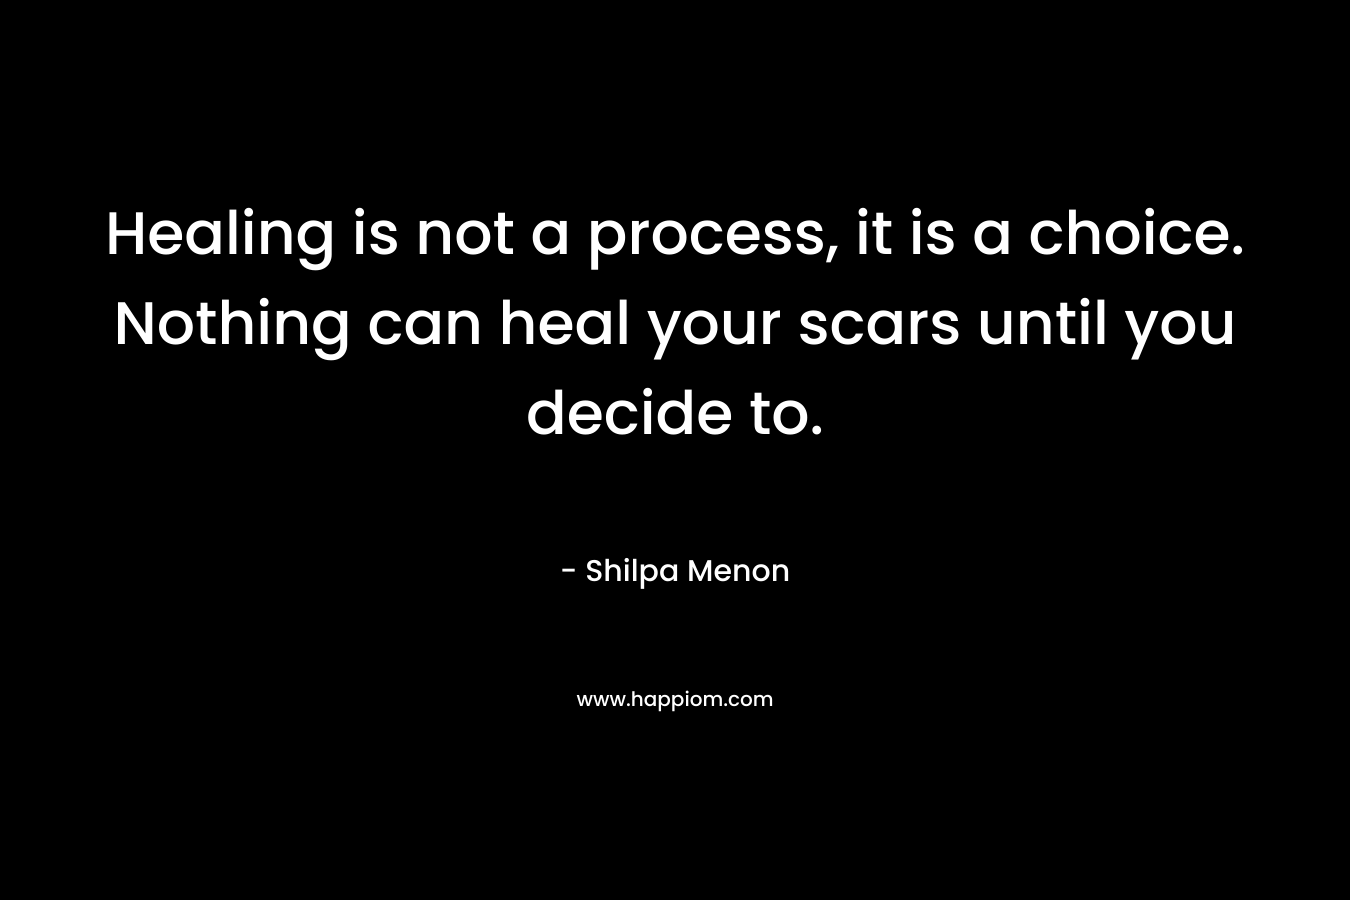 Healing is not a process, it is a choice. Nothing can heal your scars until you decide to.